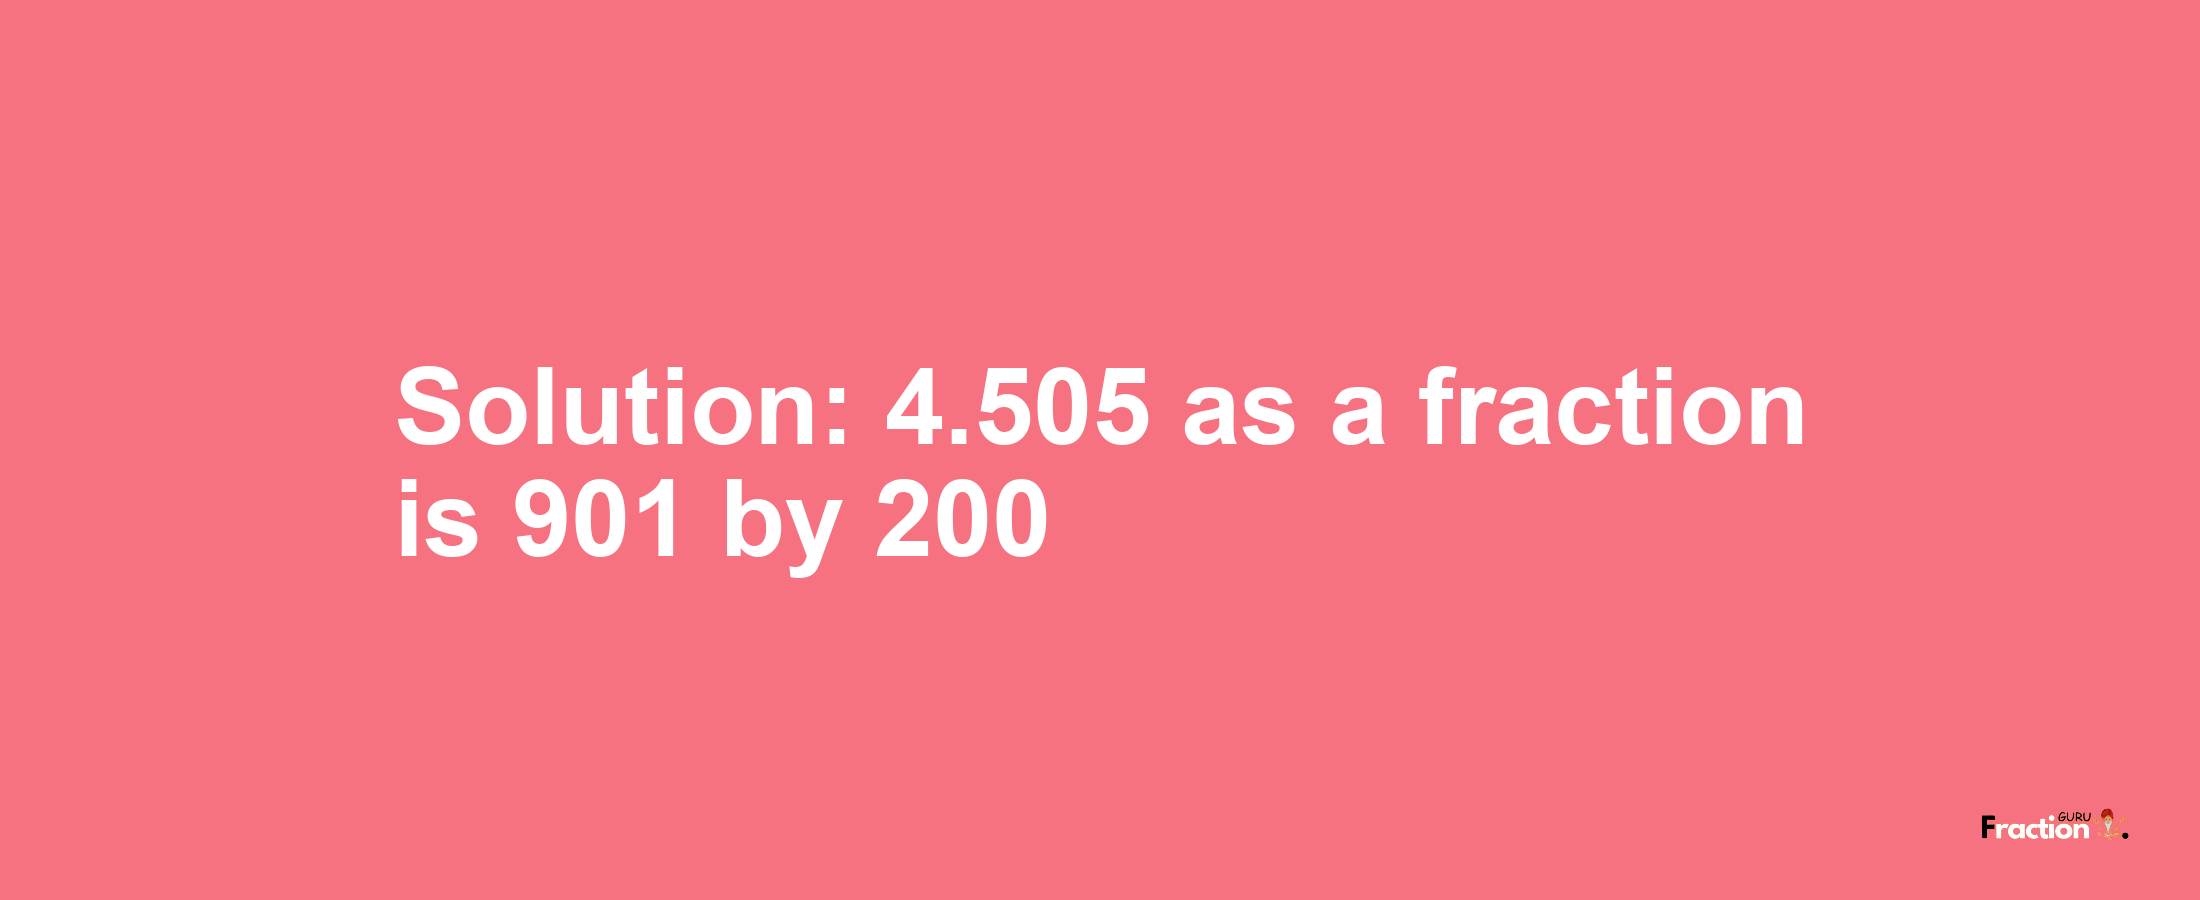 Solution:4.505 as a fraction is 901/200